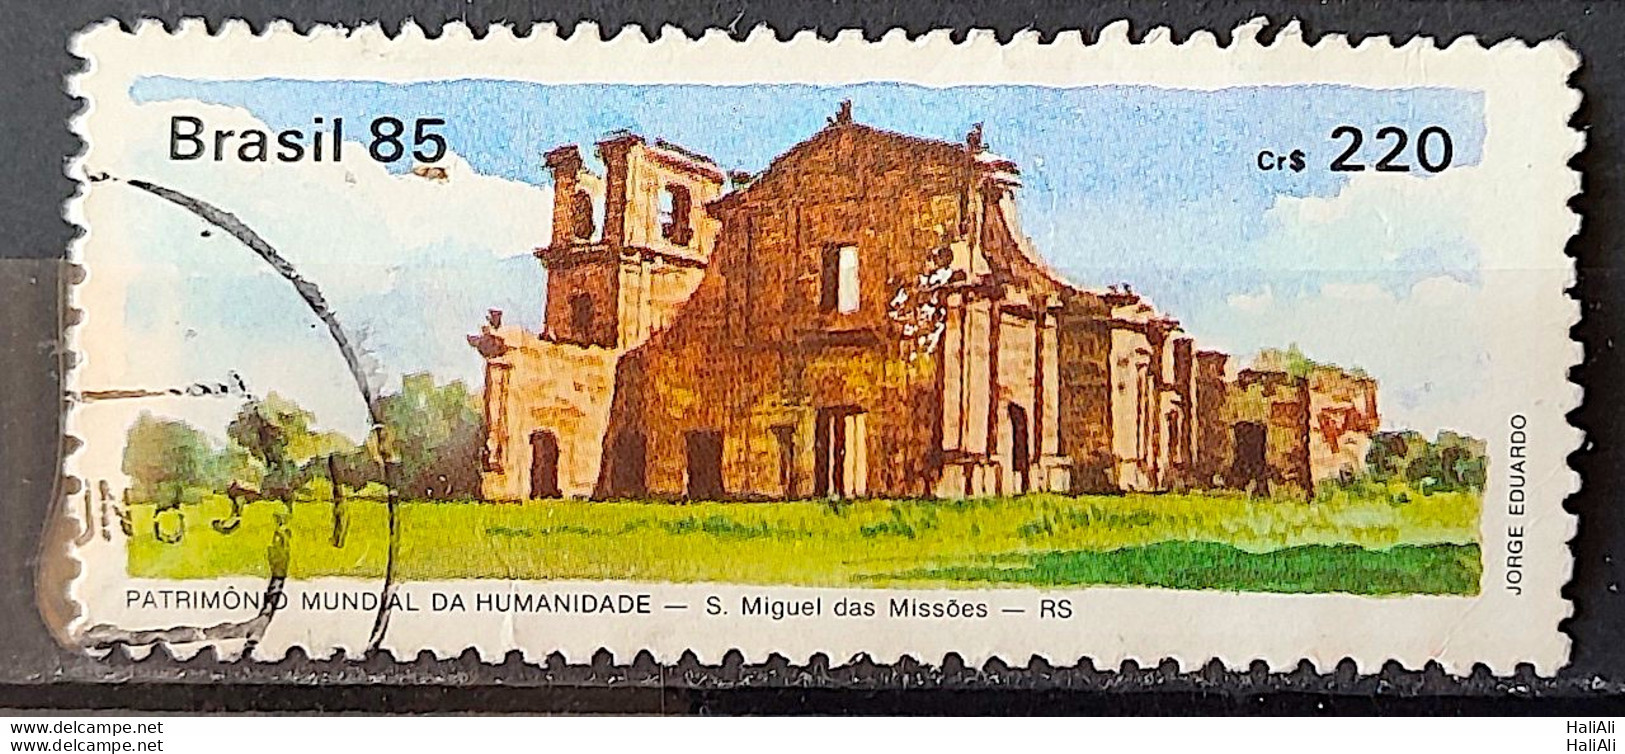 C 1448 Brazil Stamp World Heritage Of Humanity Sao Miguel Das Missoes 1985 Circulated 1 - Used Stamps